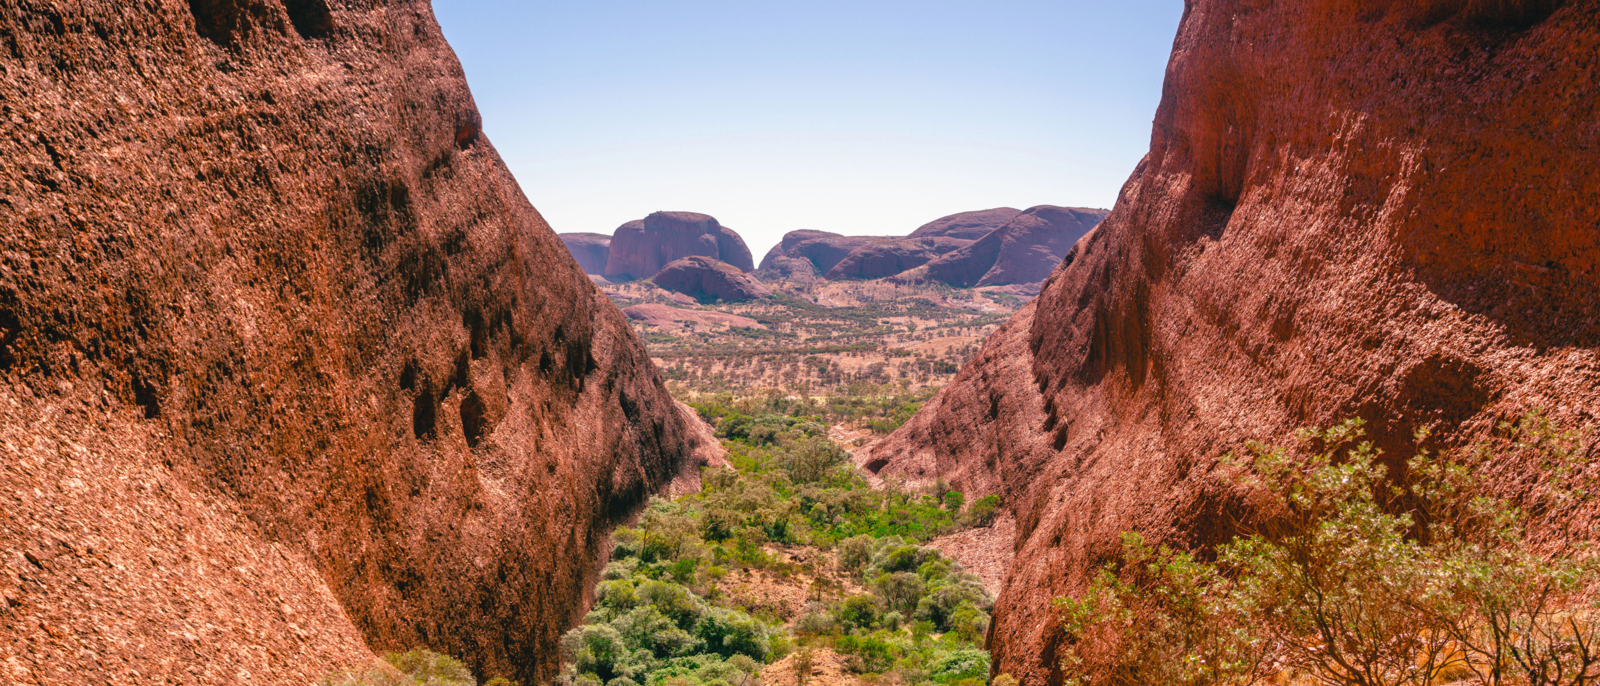 Landscape panorama from the Karingana lookout in the Olgas in NT outback Australia